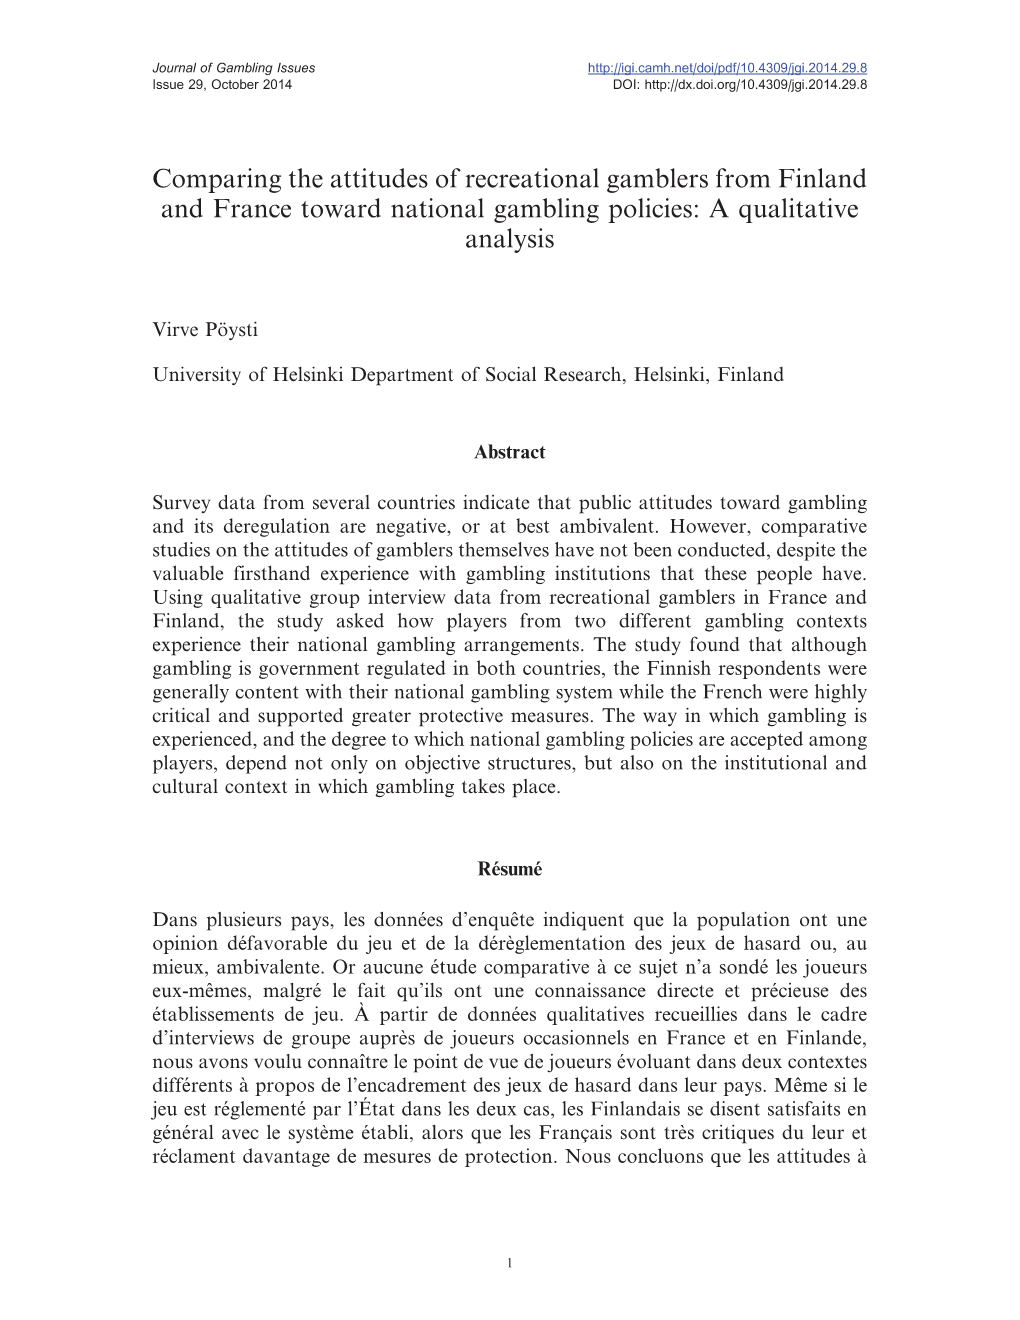 Comparing the Attitudes of Recreational Gamblers from Finland and France Toward National Gambling Policies: a Qualitative Analysis